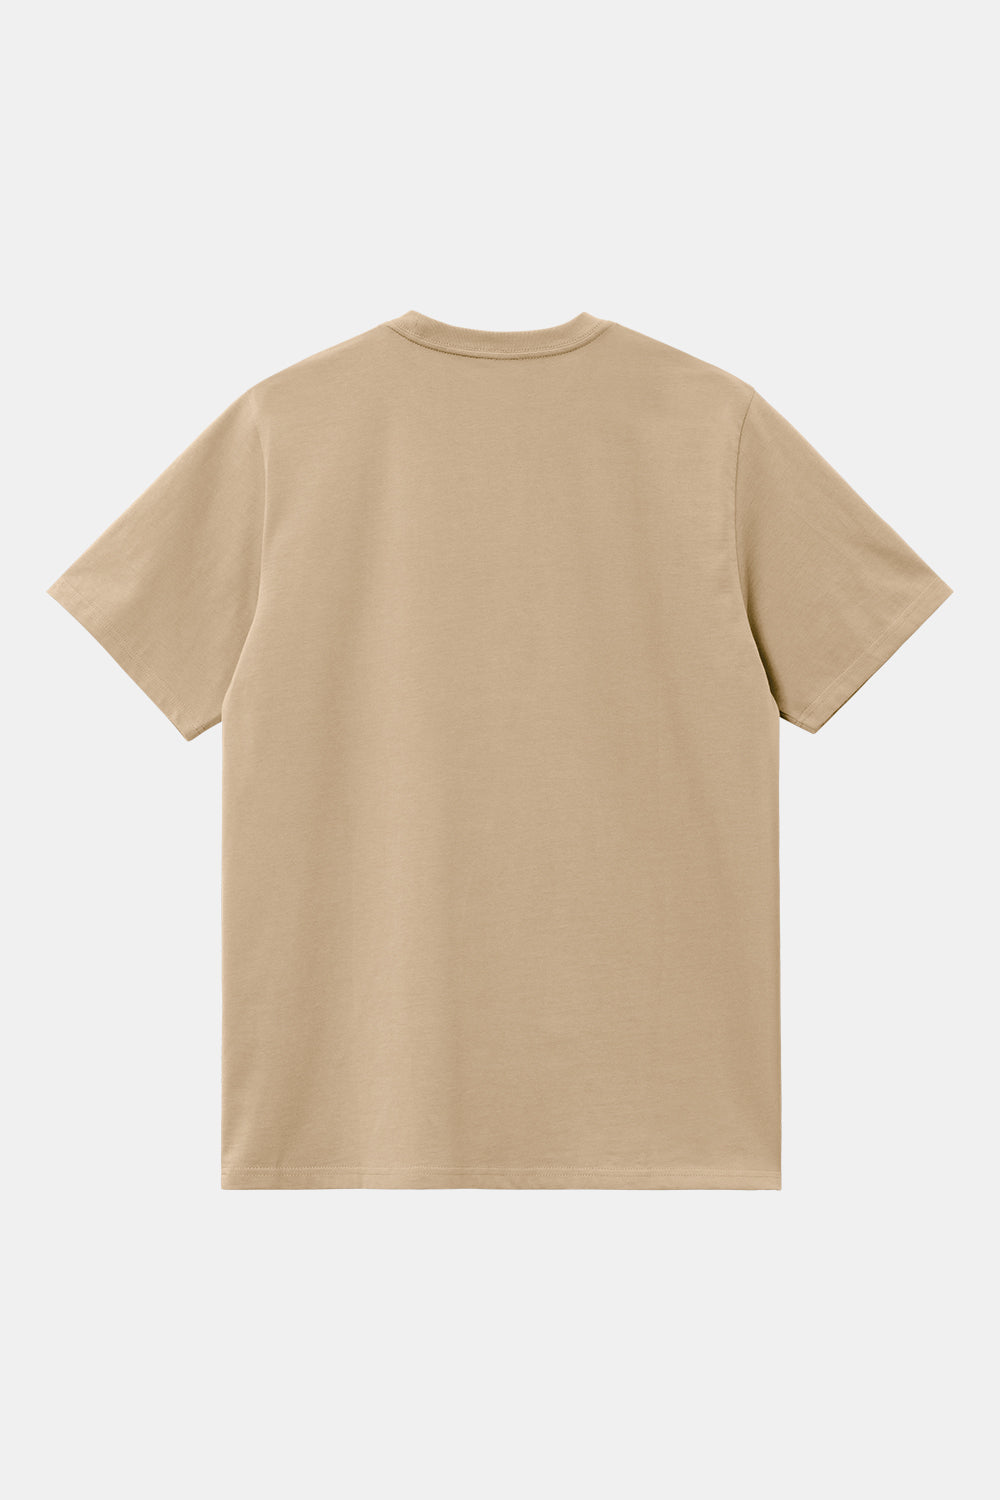 Carhartt WIP Chase T-Shirt (Sable/Gold)